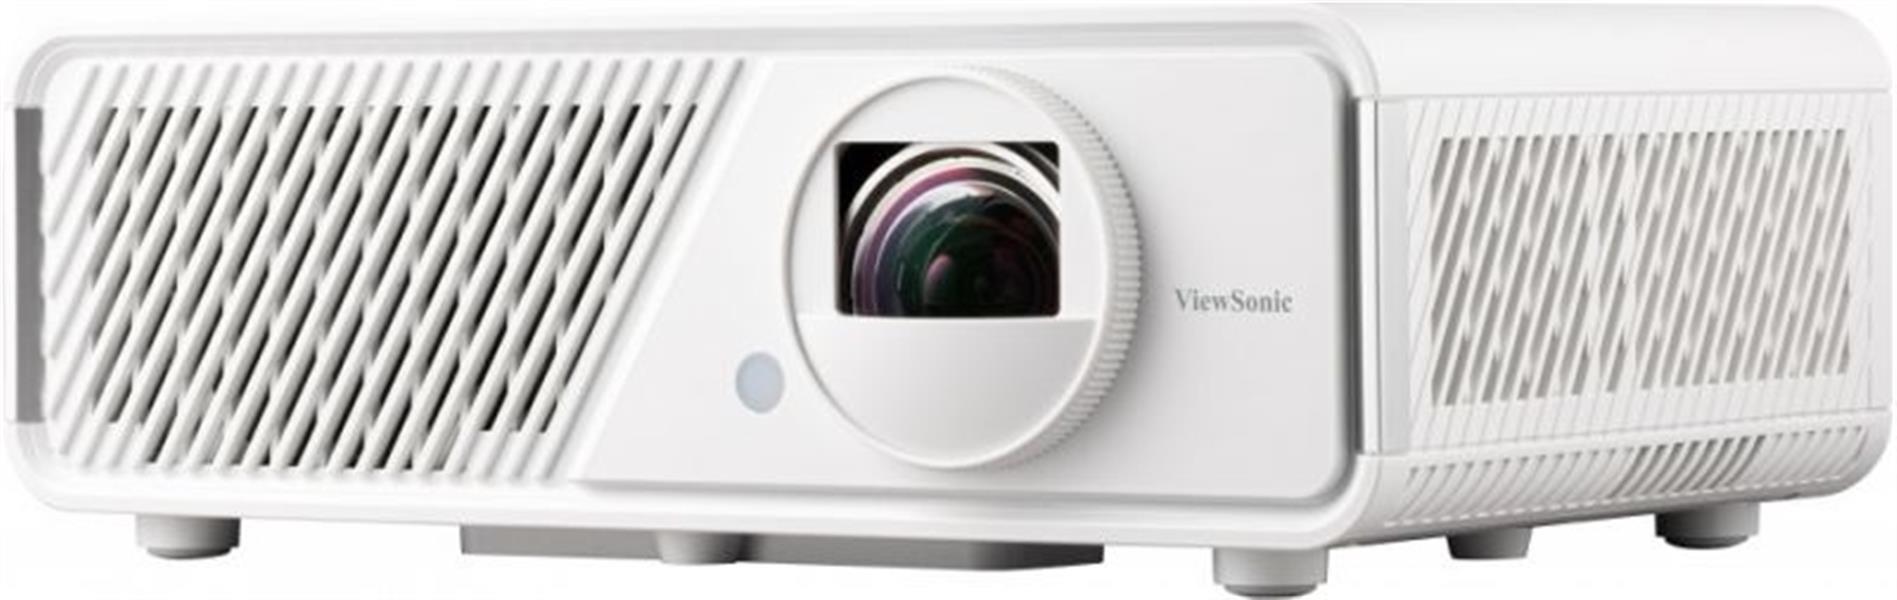 Viewsonic X2 beamer/projector Projector met normale projectieafstand LED 1080p (1920x1080) 3D Wit